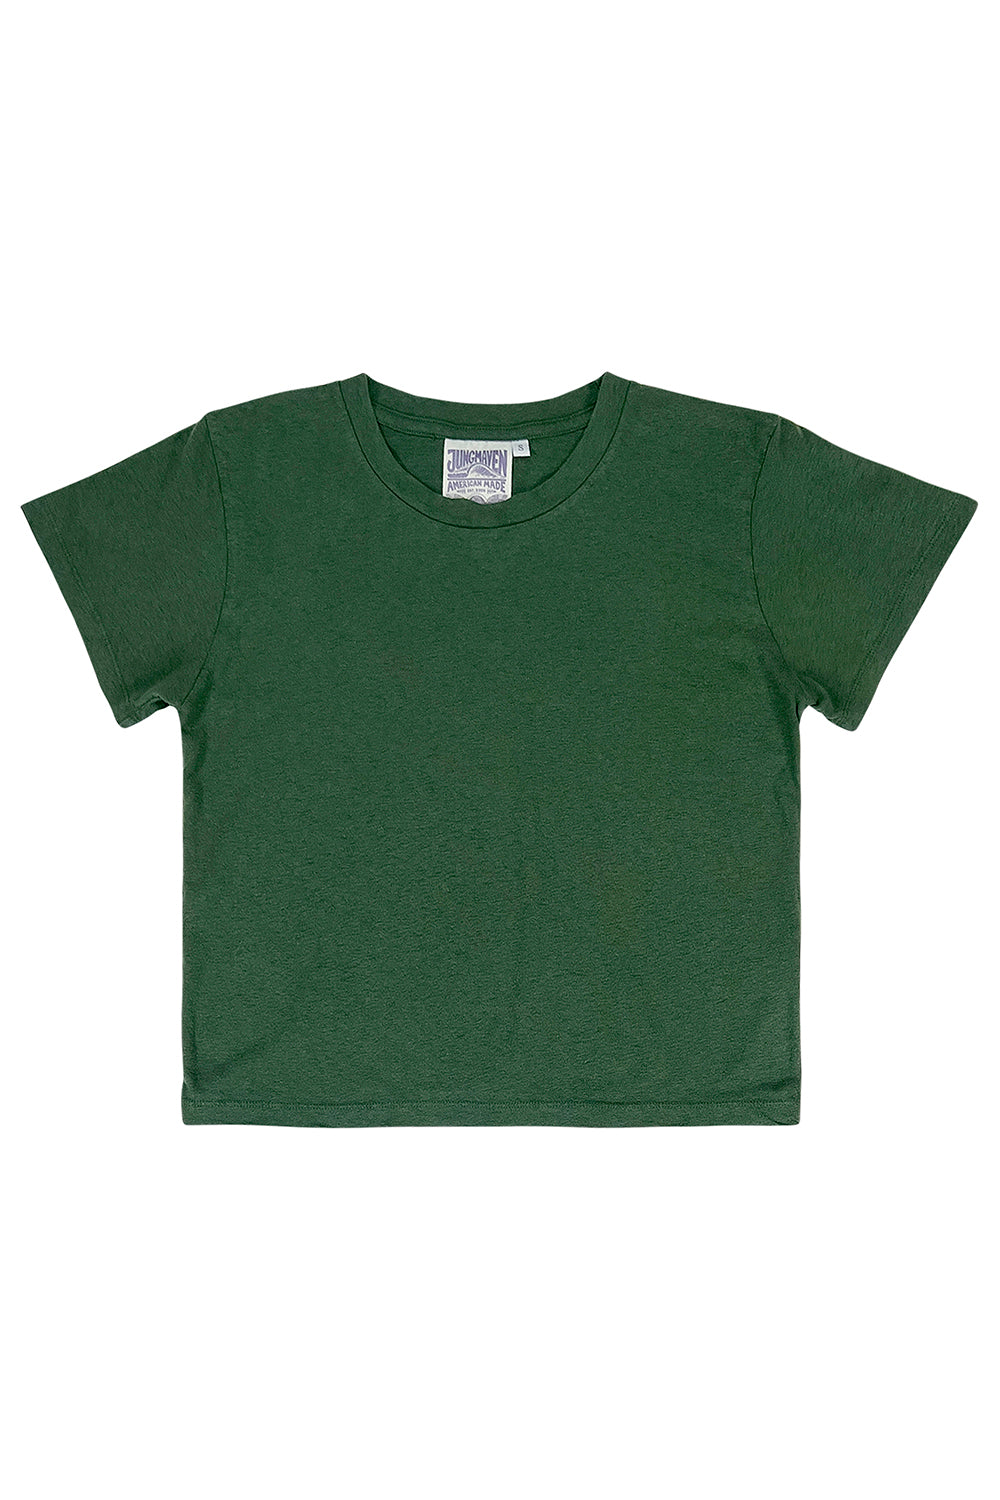 Cropped Lorel Tee | Jungmaven Hemp Clothing & Accessories / Color: Hunter Green